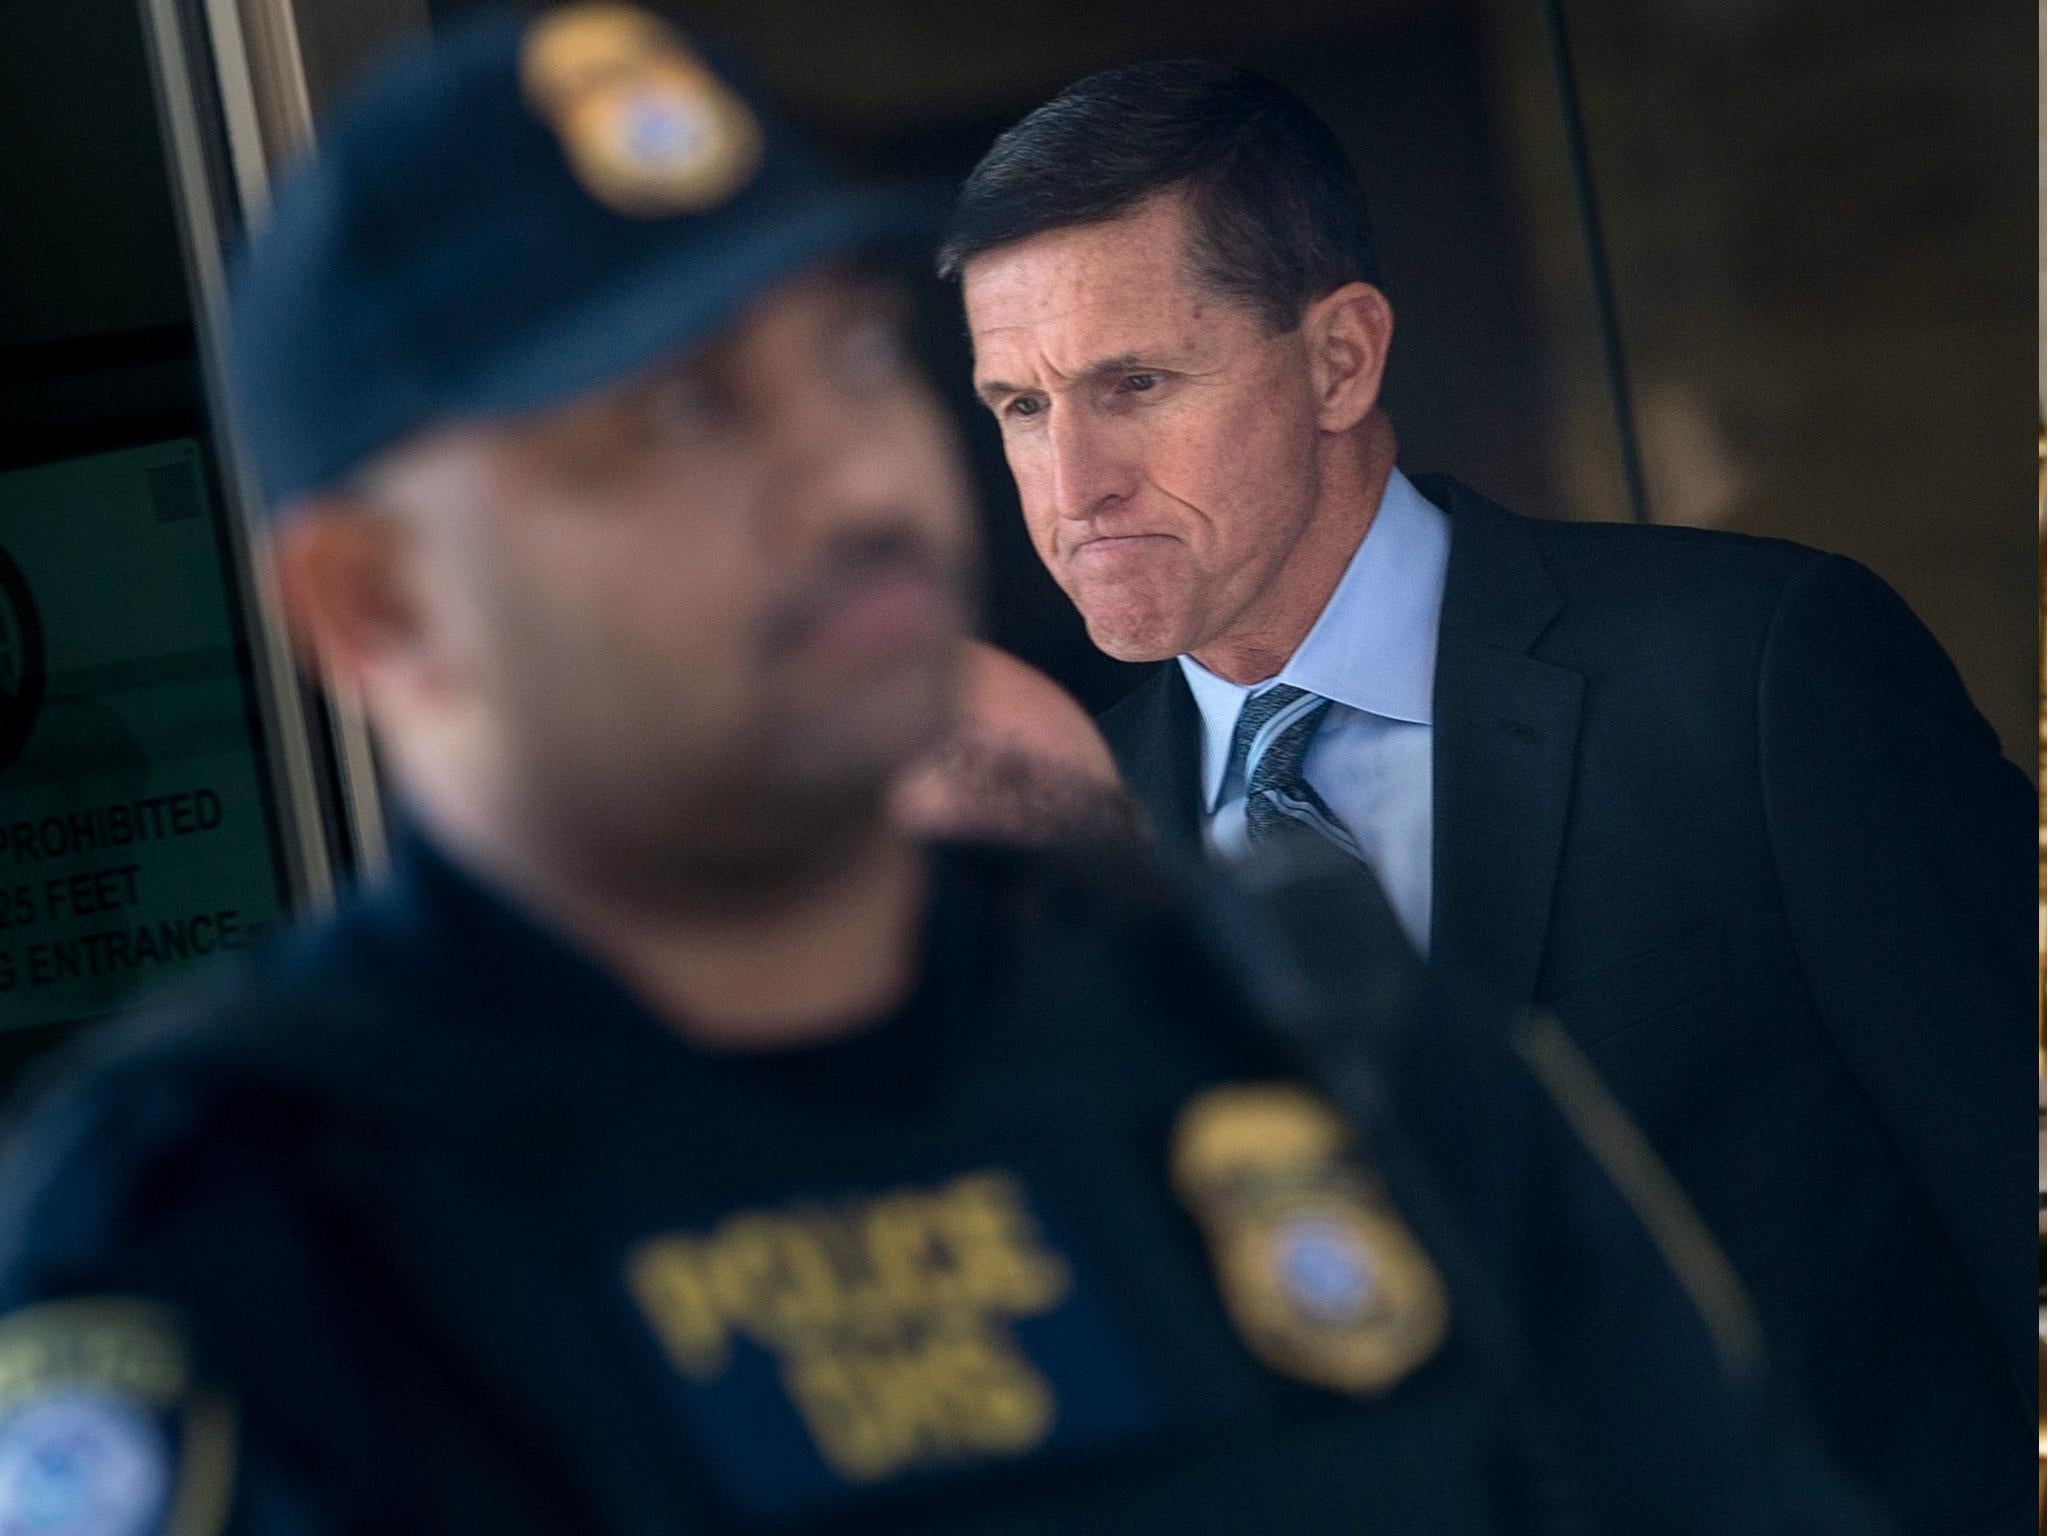 Michael Flynn, former national security adviser to US President Donald Trump, leaves Federal Court 1 December 2017 in Washington, DC.